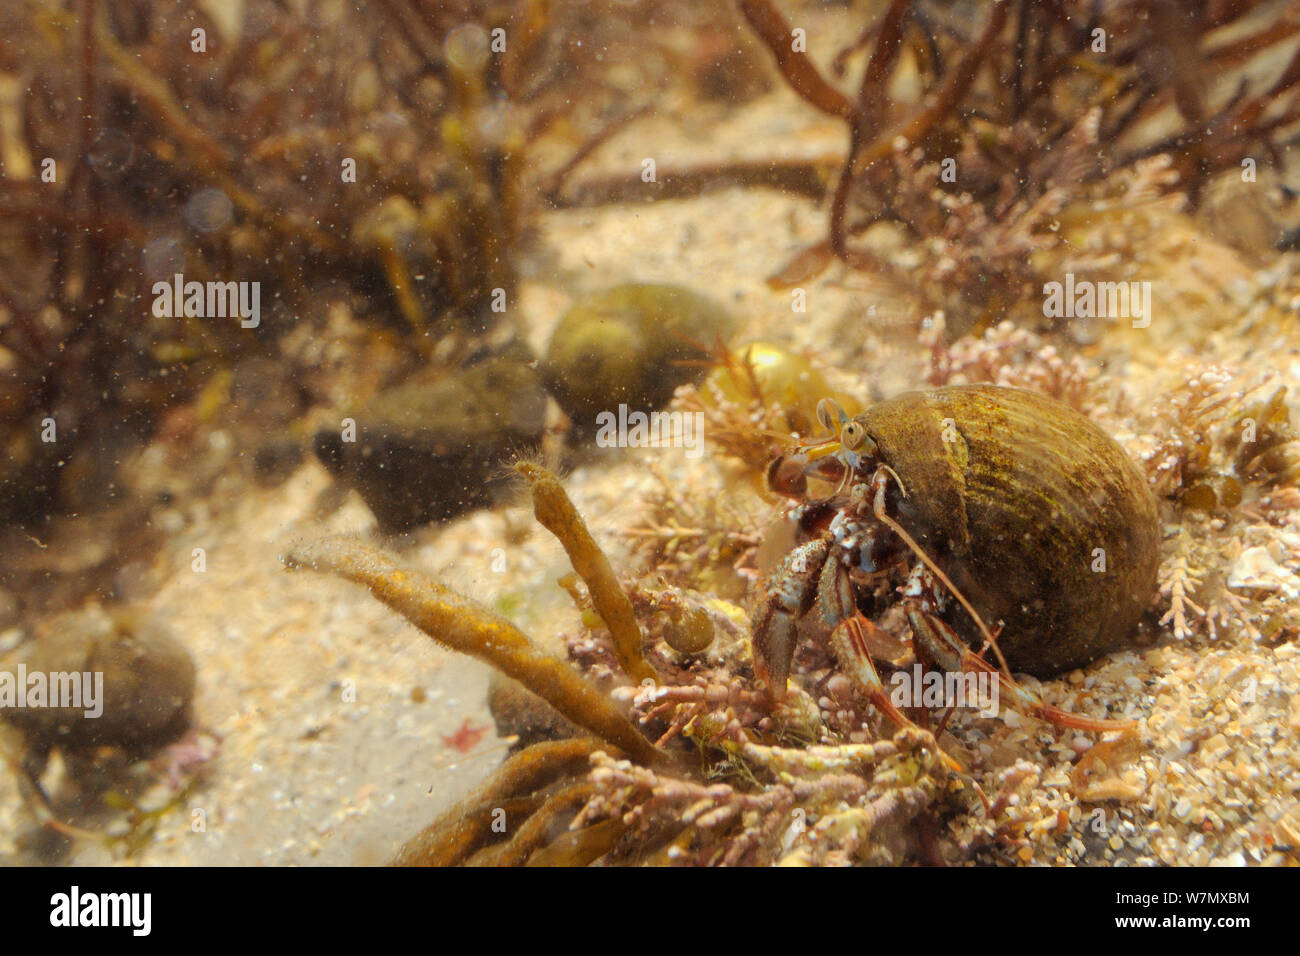 Common Hermit crab (Pagurus bernhardus) in a Common periwinkle shell crawling over floor of a rockpool, Crail, Fife, UK, July. Stock Photo